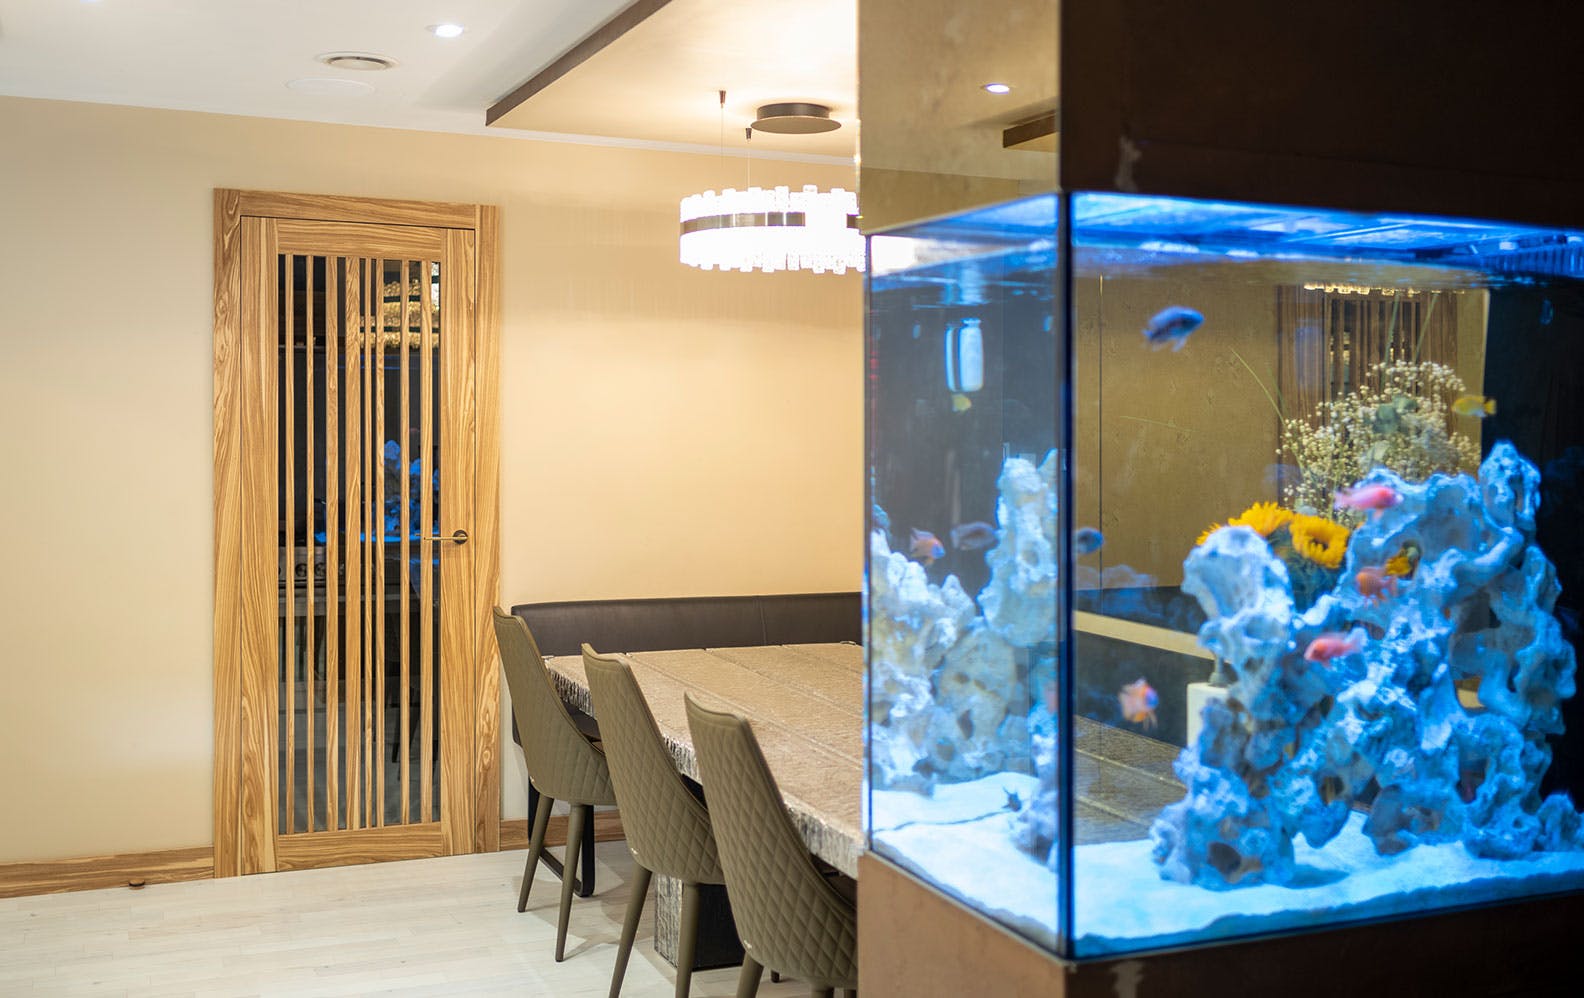 A modern dining area with tropical fish tank in the foreground. Features a bespoke Deuren, Gio glass doors with irregular vertical timber strips, in olive oak.